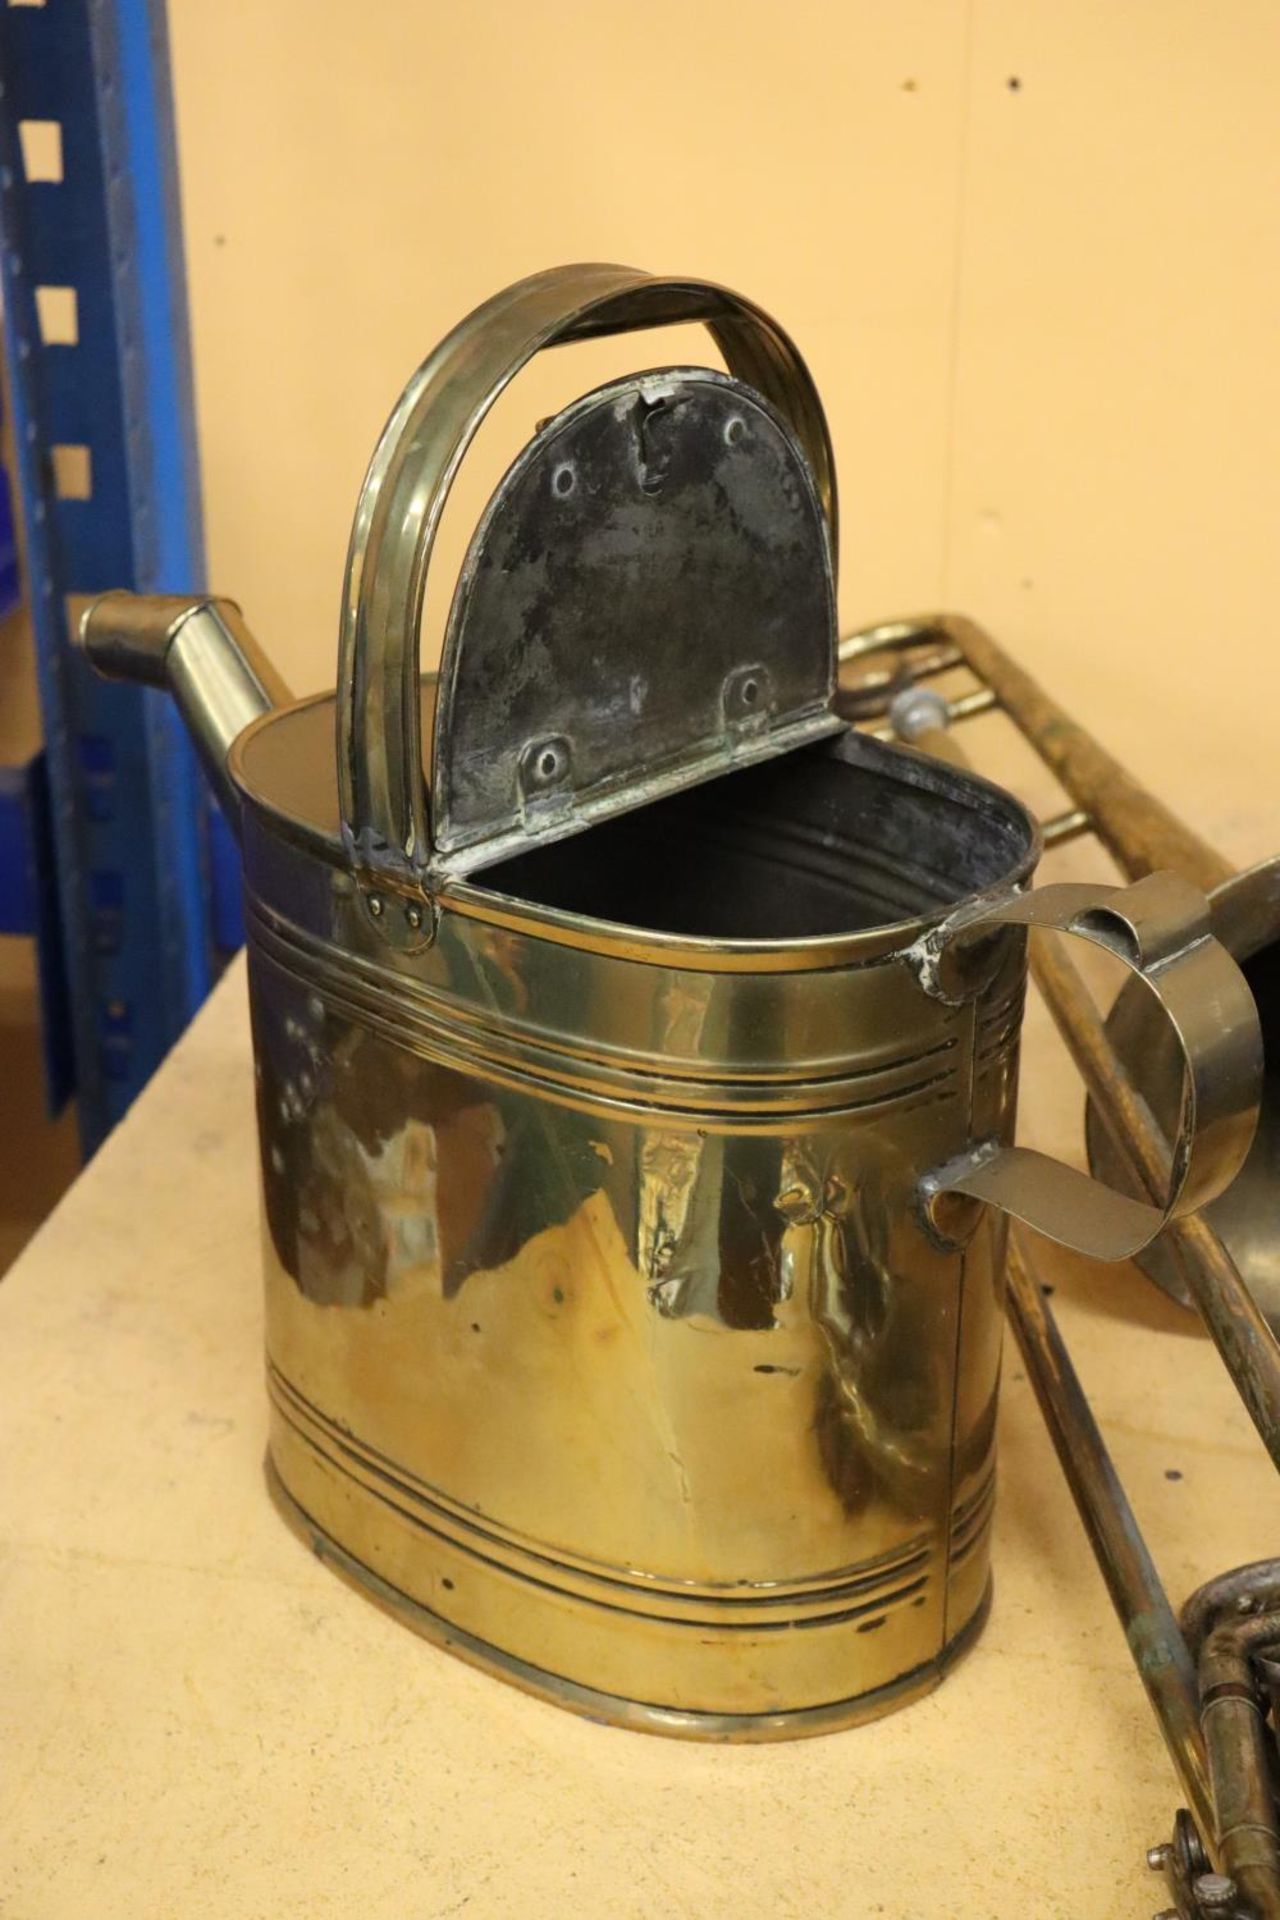 TWO BRASS WATERING CANS, ONE MISSING THE HANDLE - Image 4 of 5